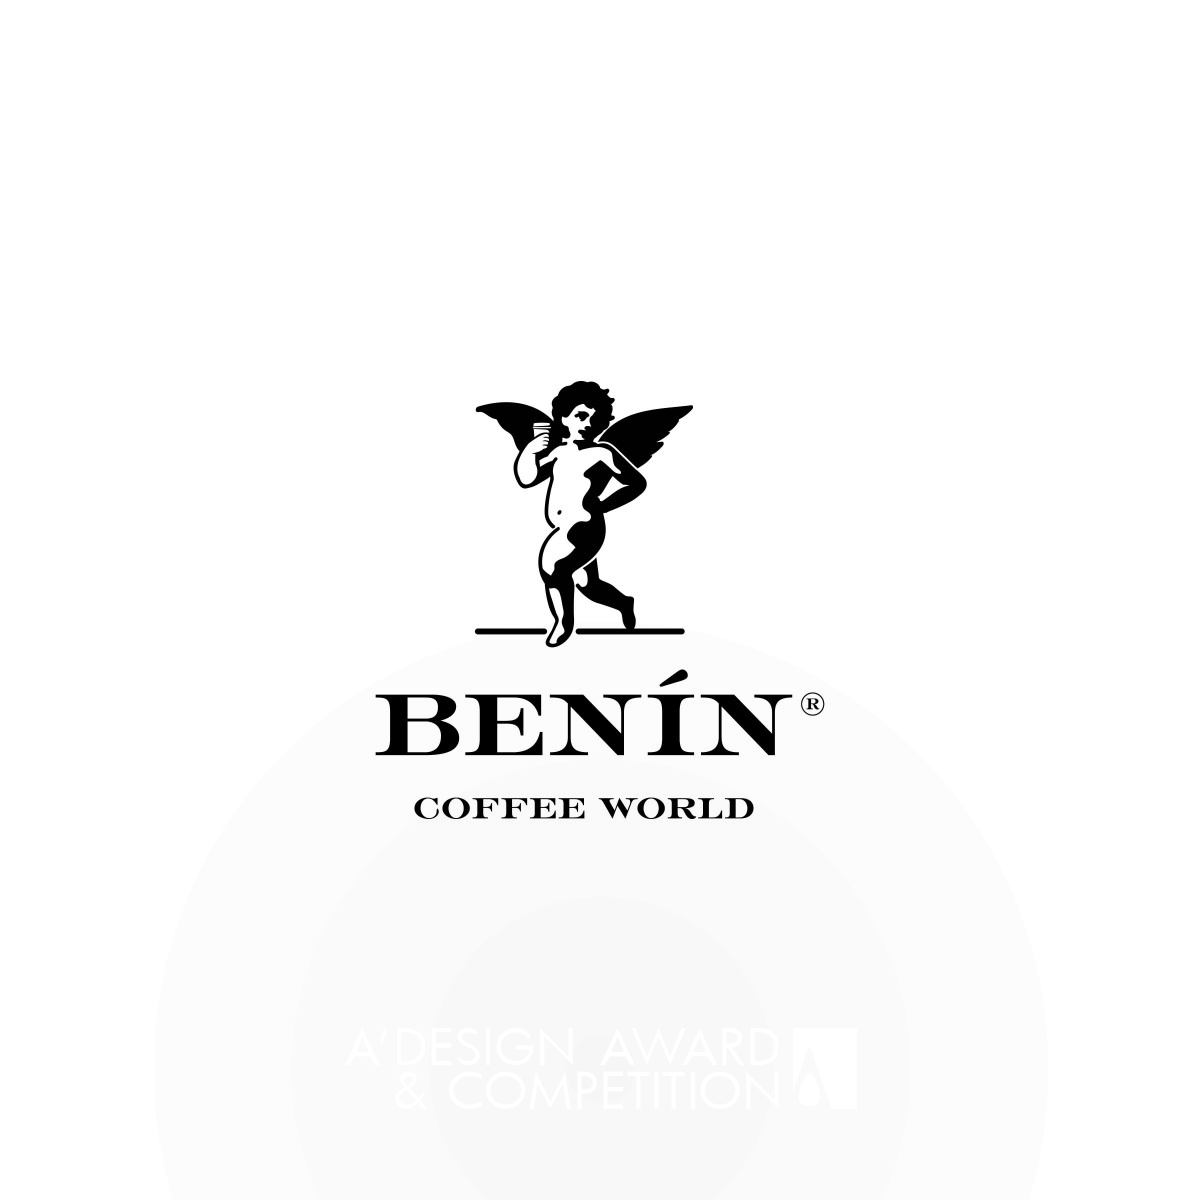 Benin's Visual Identity Transmits Happiness, Passion, and Feel-Good Vibes